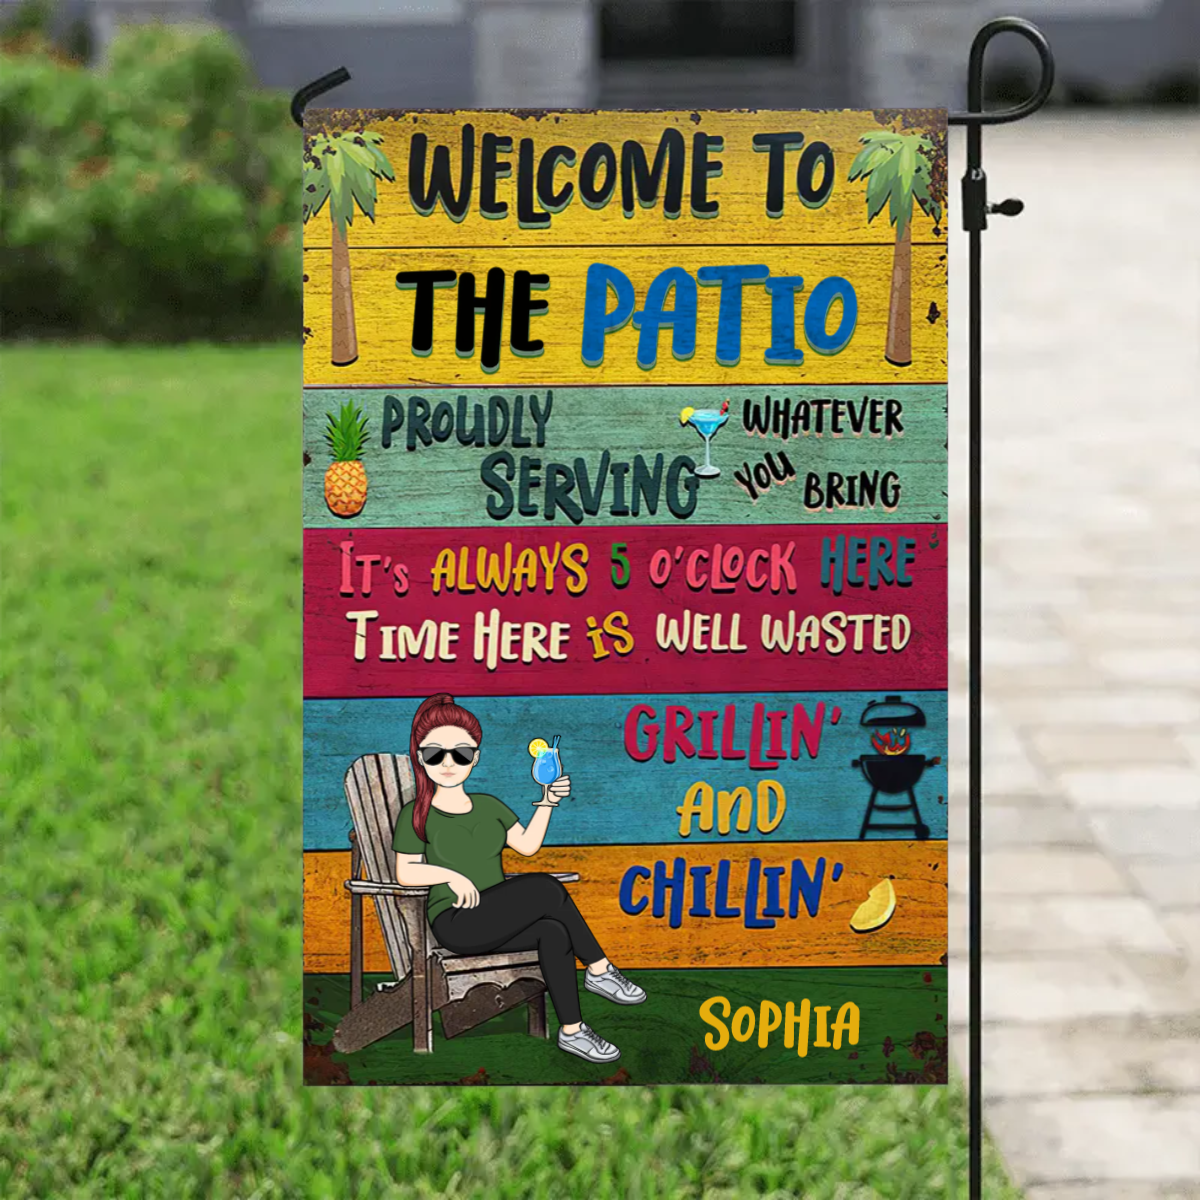 Patio Welcome Grilling Proudly Serving Whatever You Bring Single - Backyard Sign - Personalized Garden Flag